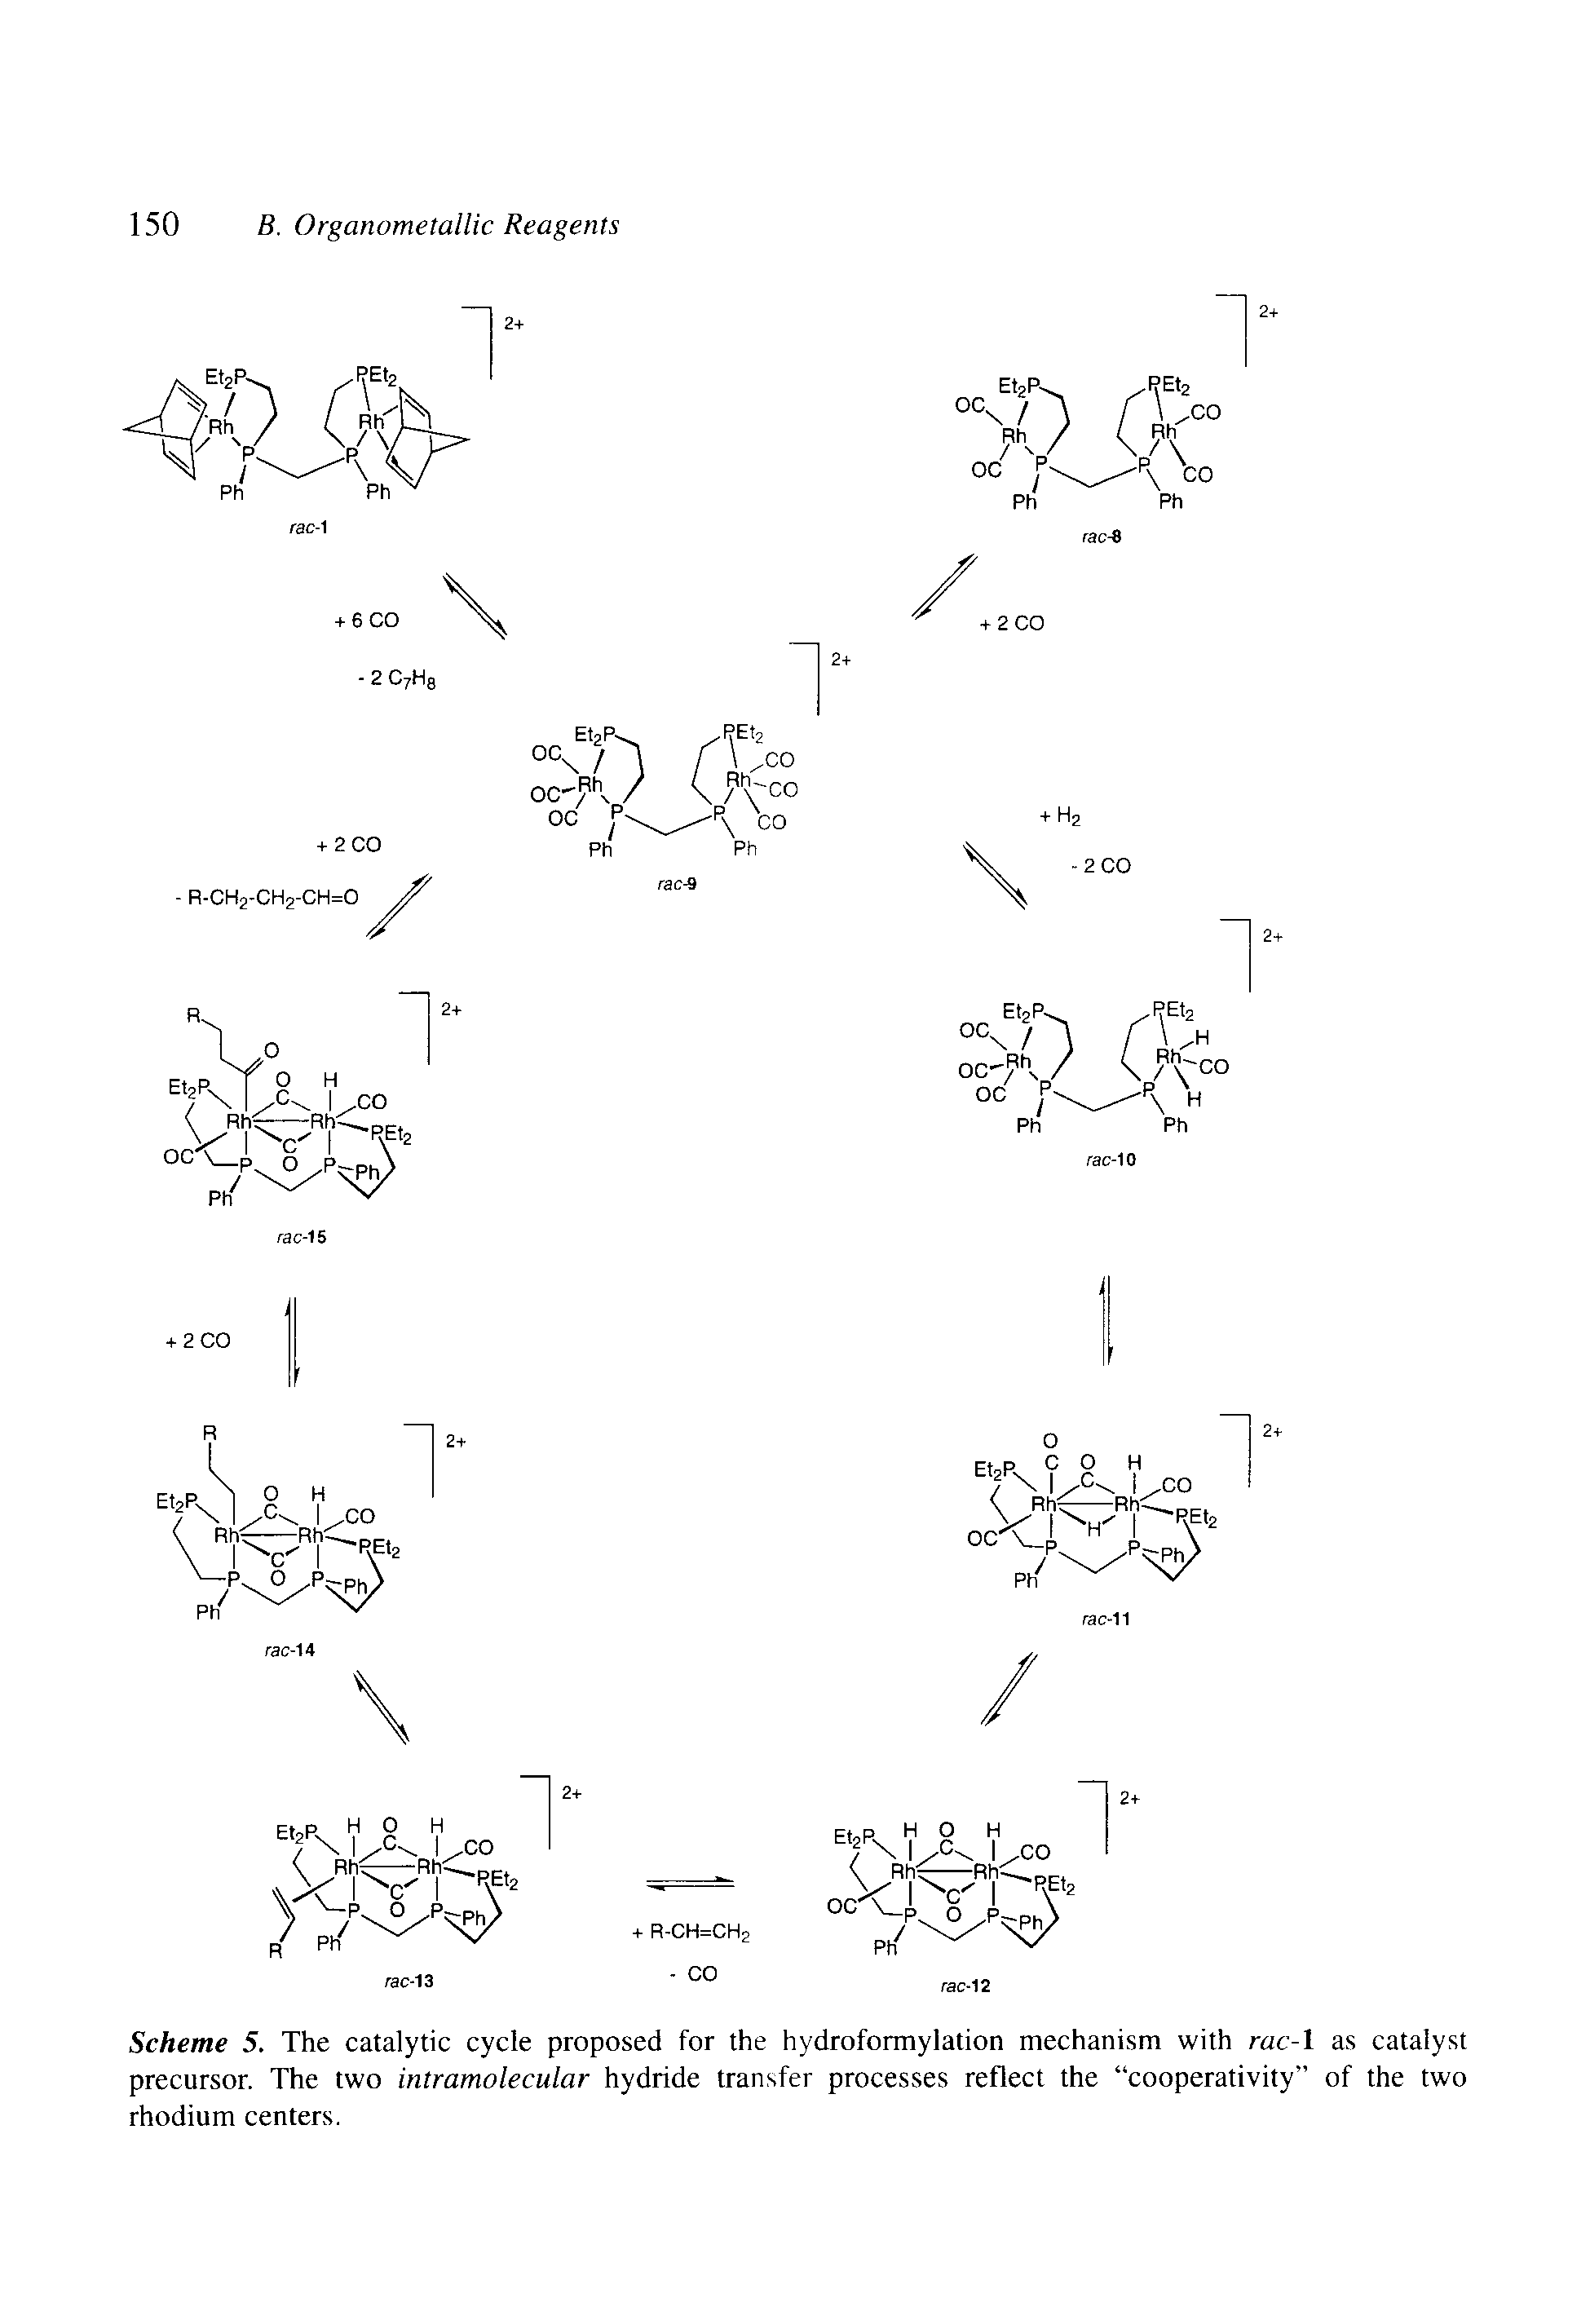 Scheme 5. The catalytic cycle proposed for the hydroformylation mechanism with rac-1 as catalyst precursor. The two intramolecular hydride transfer processes reflect the cooperativity of the two rhodium centers.